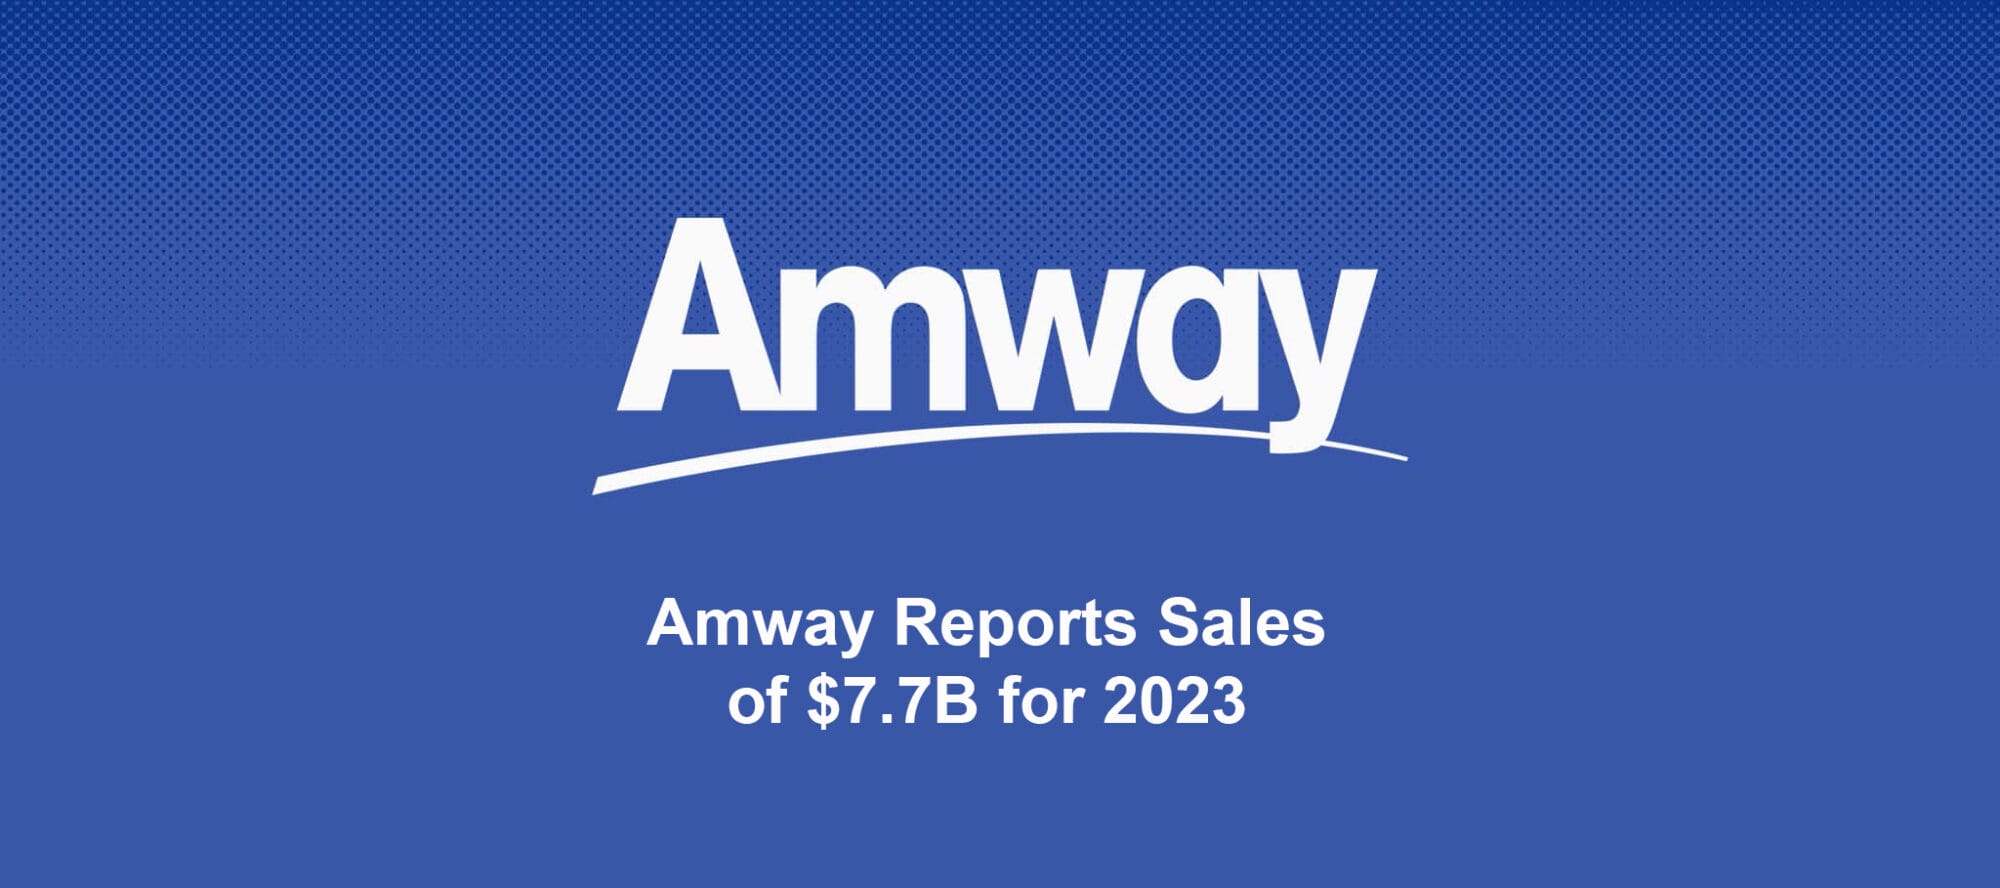 Amway 2023 Sales Announcement